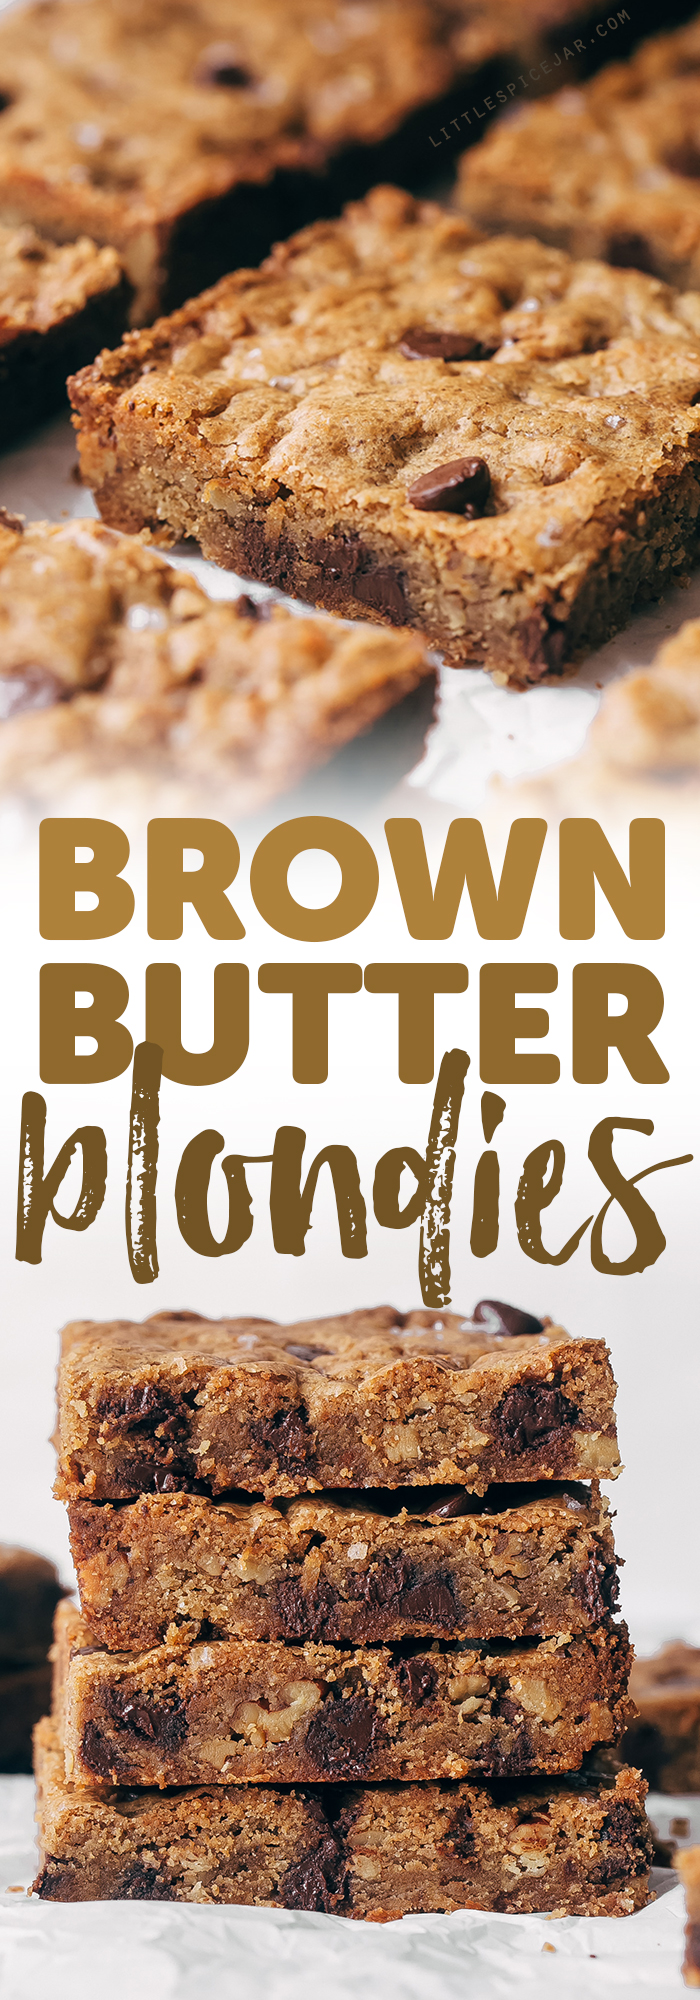 Brown Butter Pecan Chocolate Chip Blondies - butterscotch flavored base with tons of nutty pecans and creamy chocolate chips. These blondies are absolutely addicting! #blondies #chocolatechipblondies #brownbutterblondies #pecanblondies | Littlespicejar.com